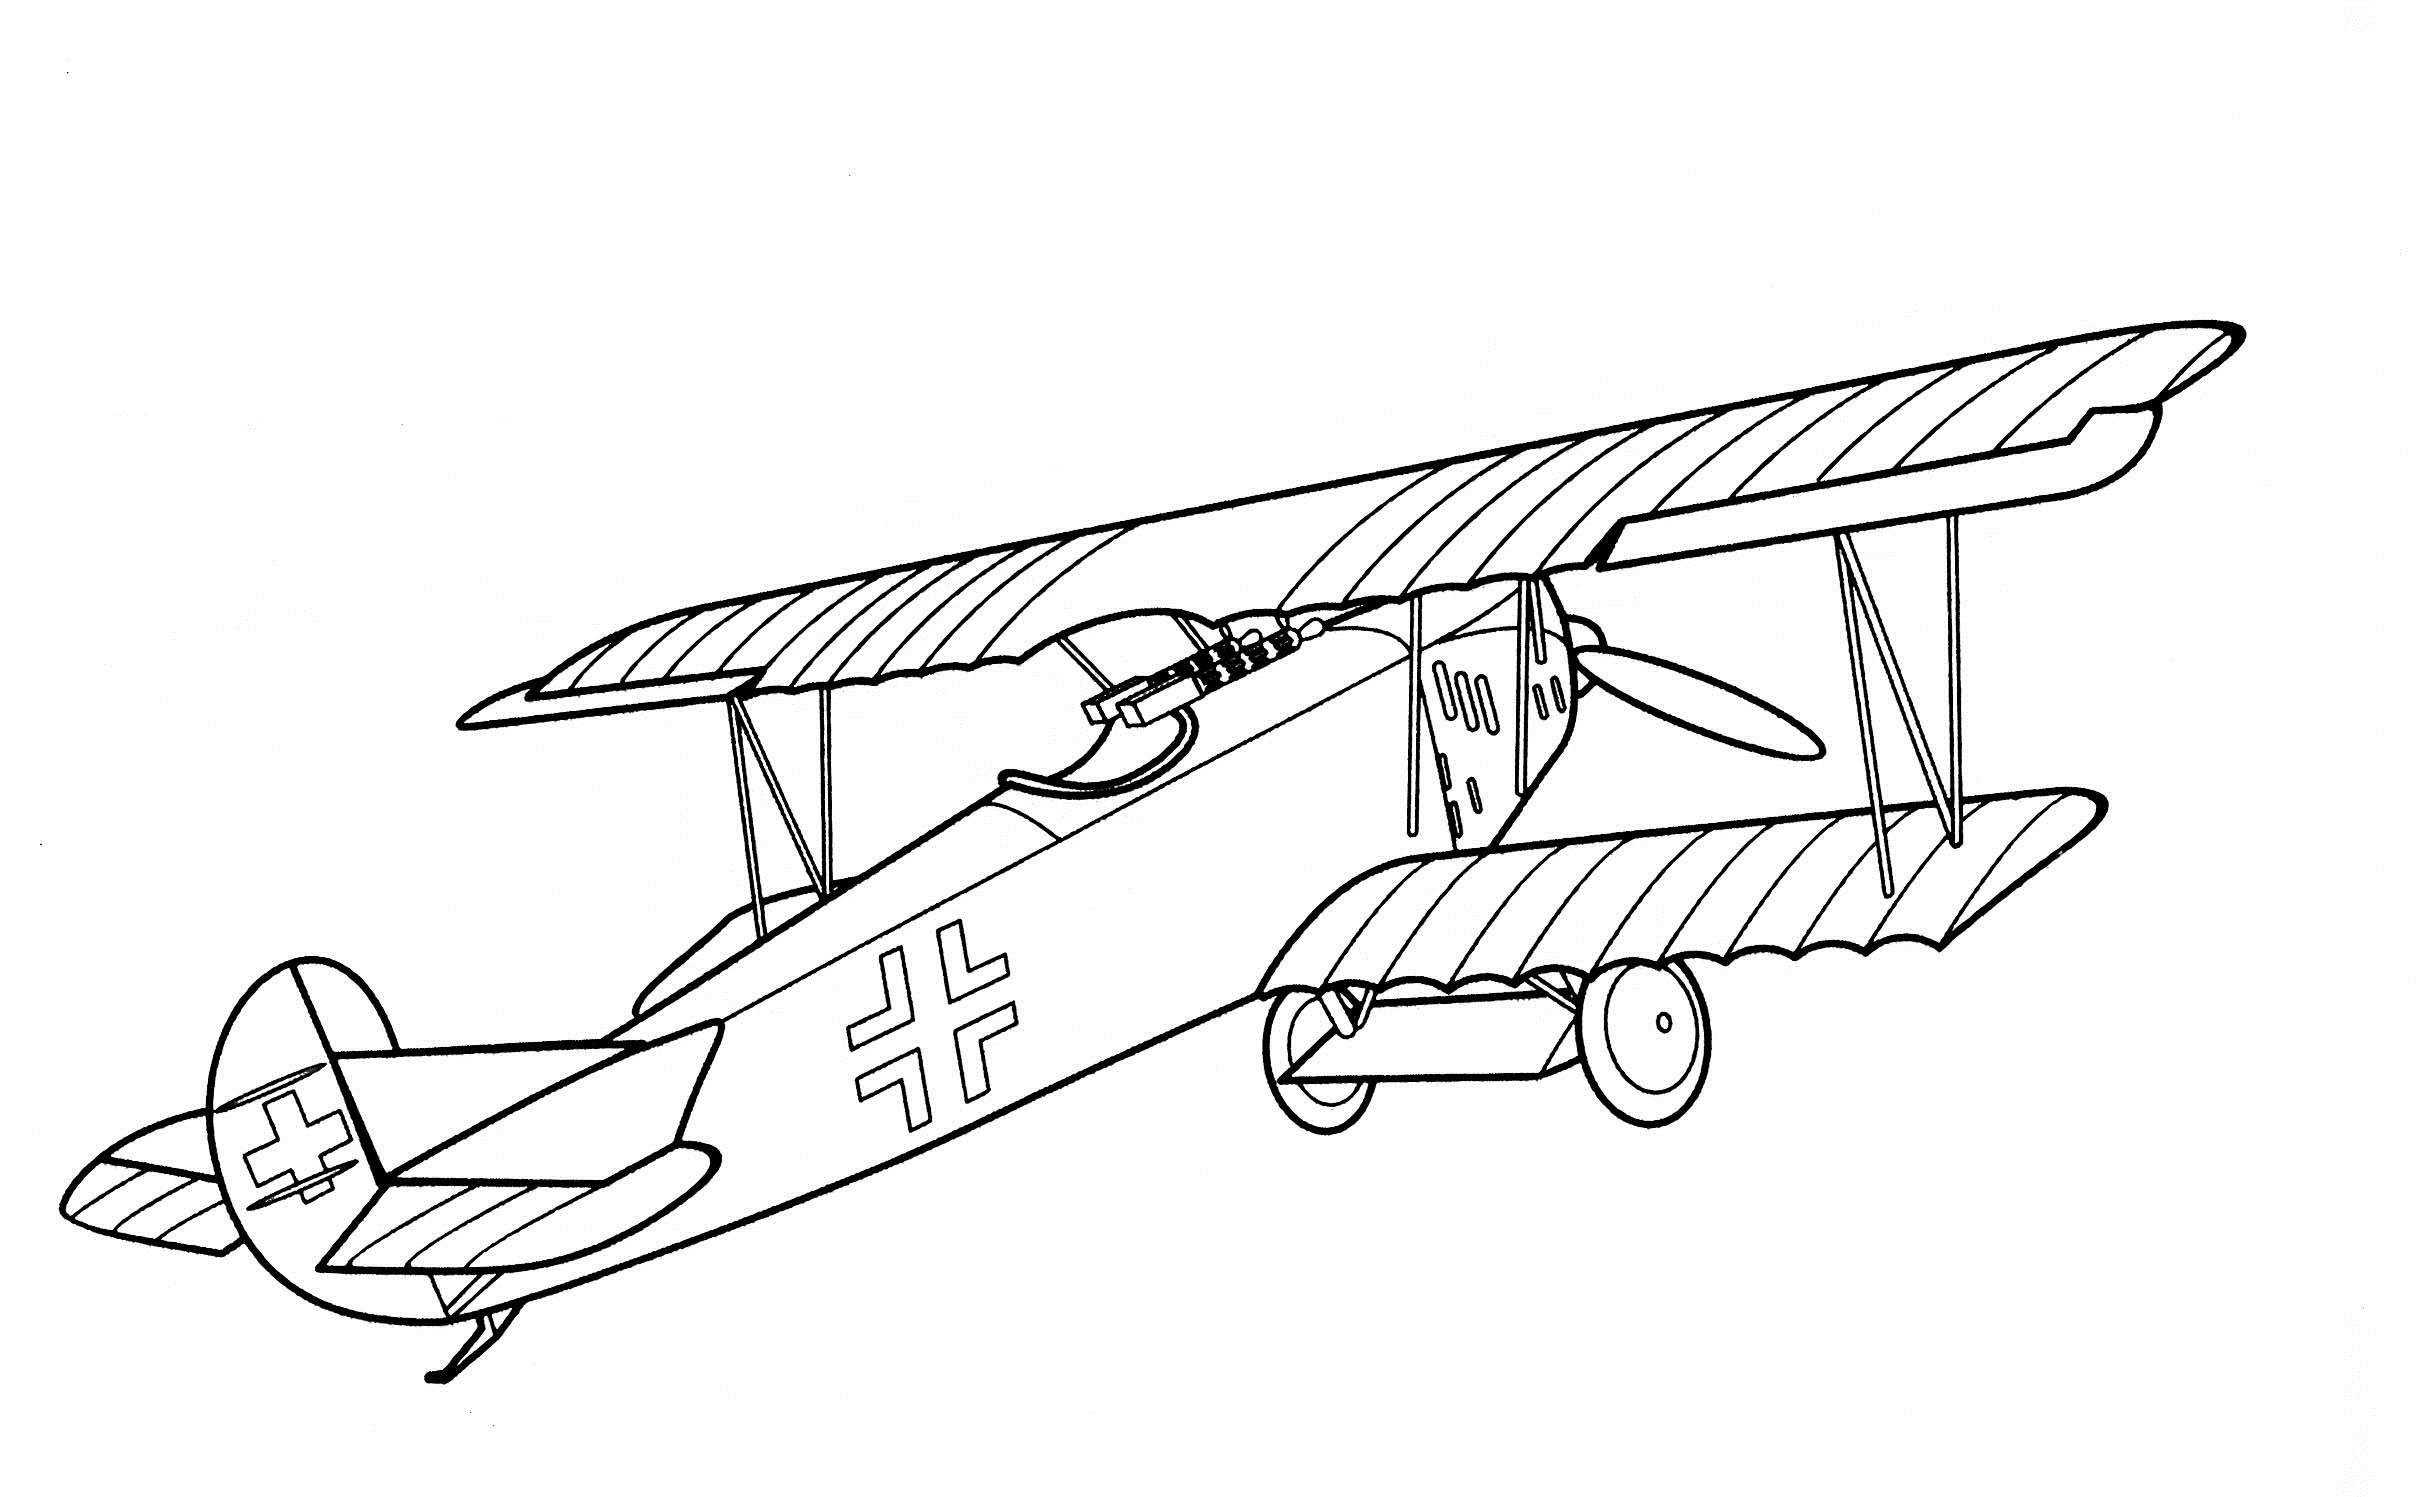 War Plane coloring pages to download and print for free